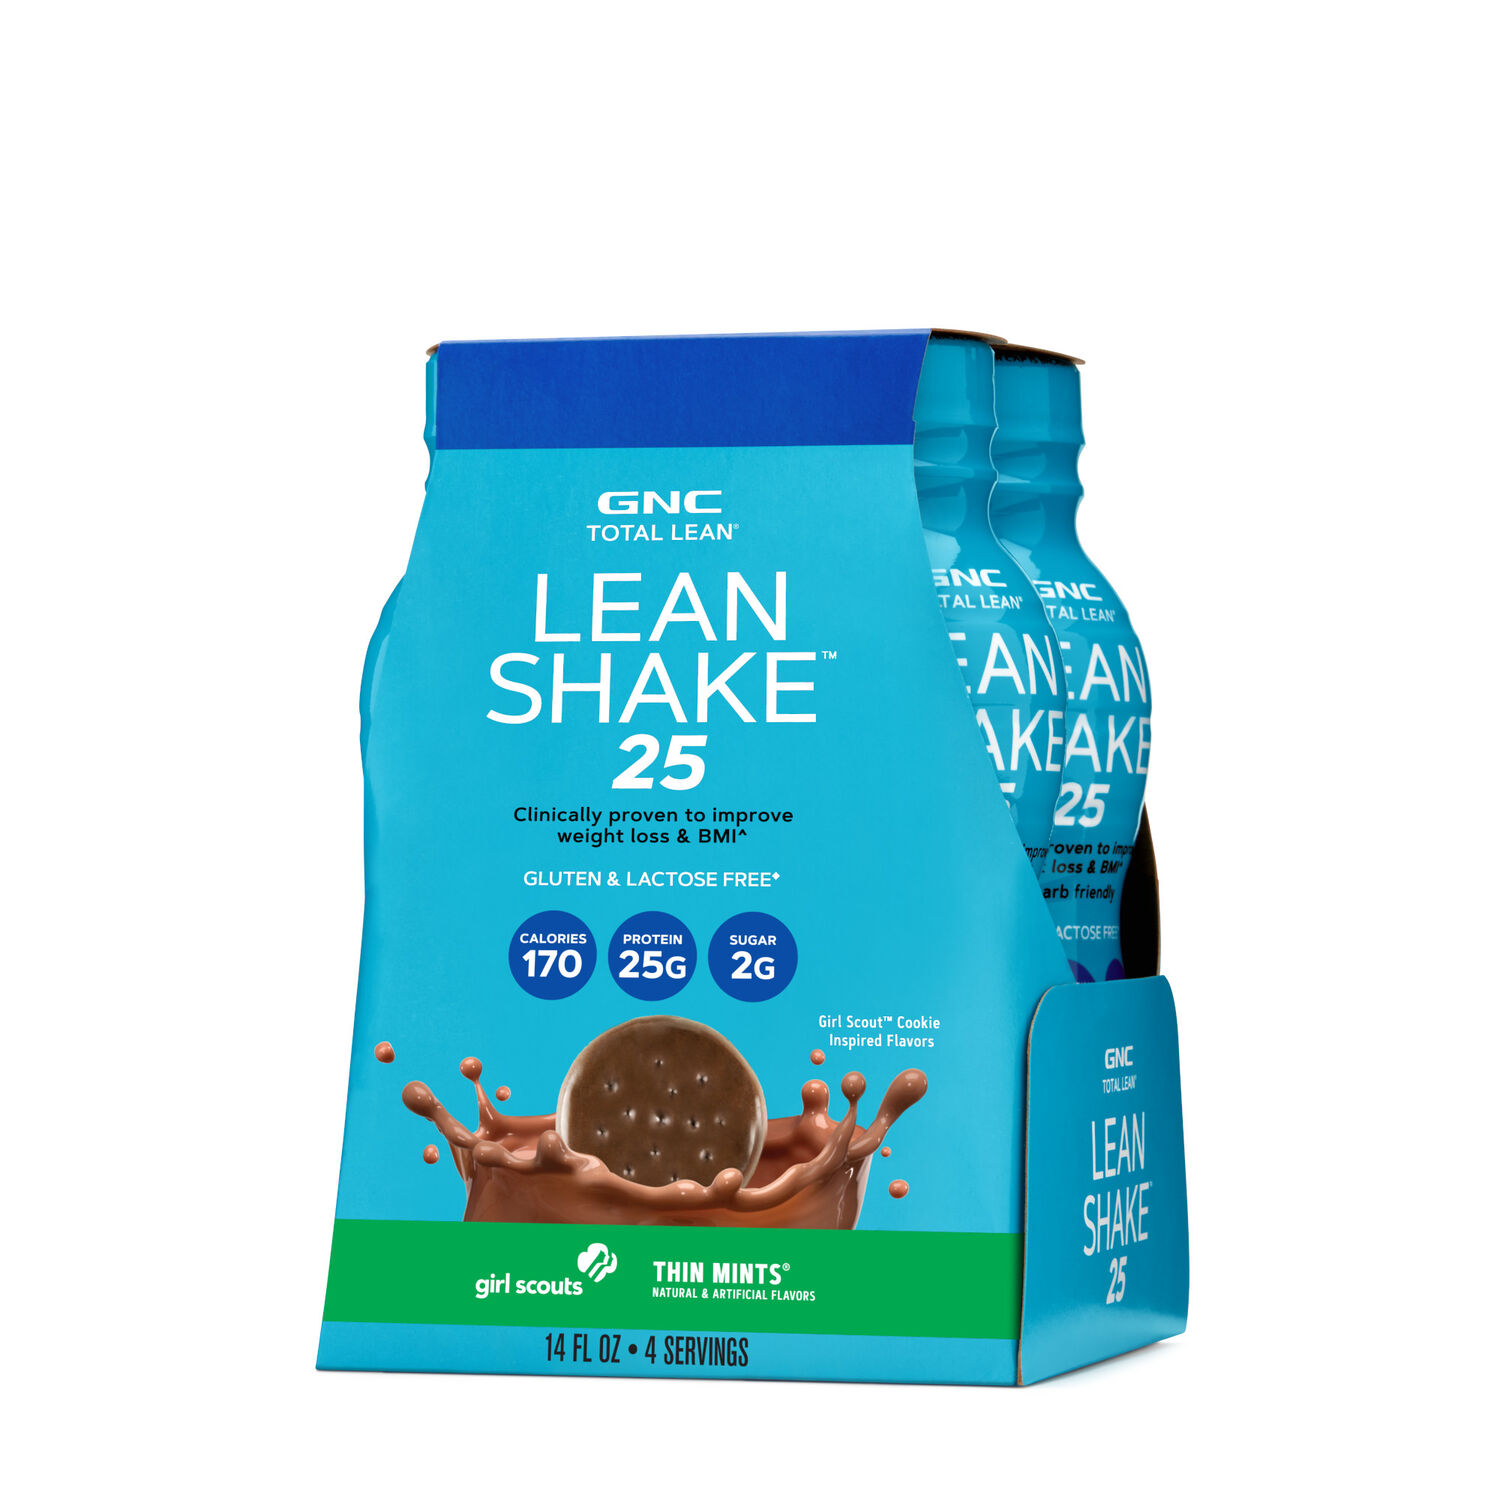 GNC Total Lean Lean Shake 25 Girl Scouts Thin Mints Protein Shake - 4 Pack